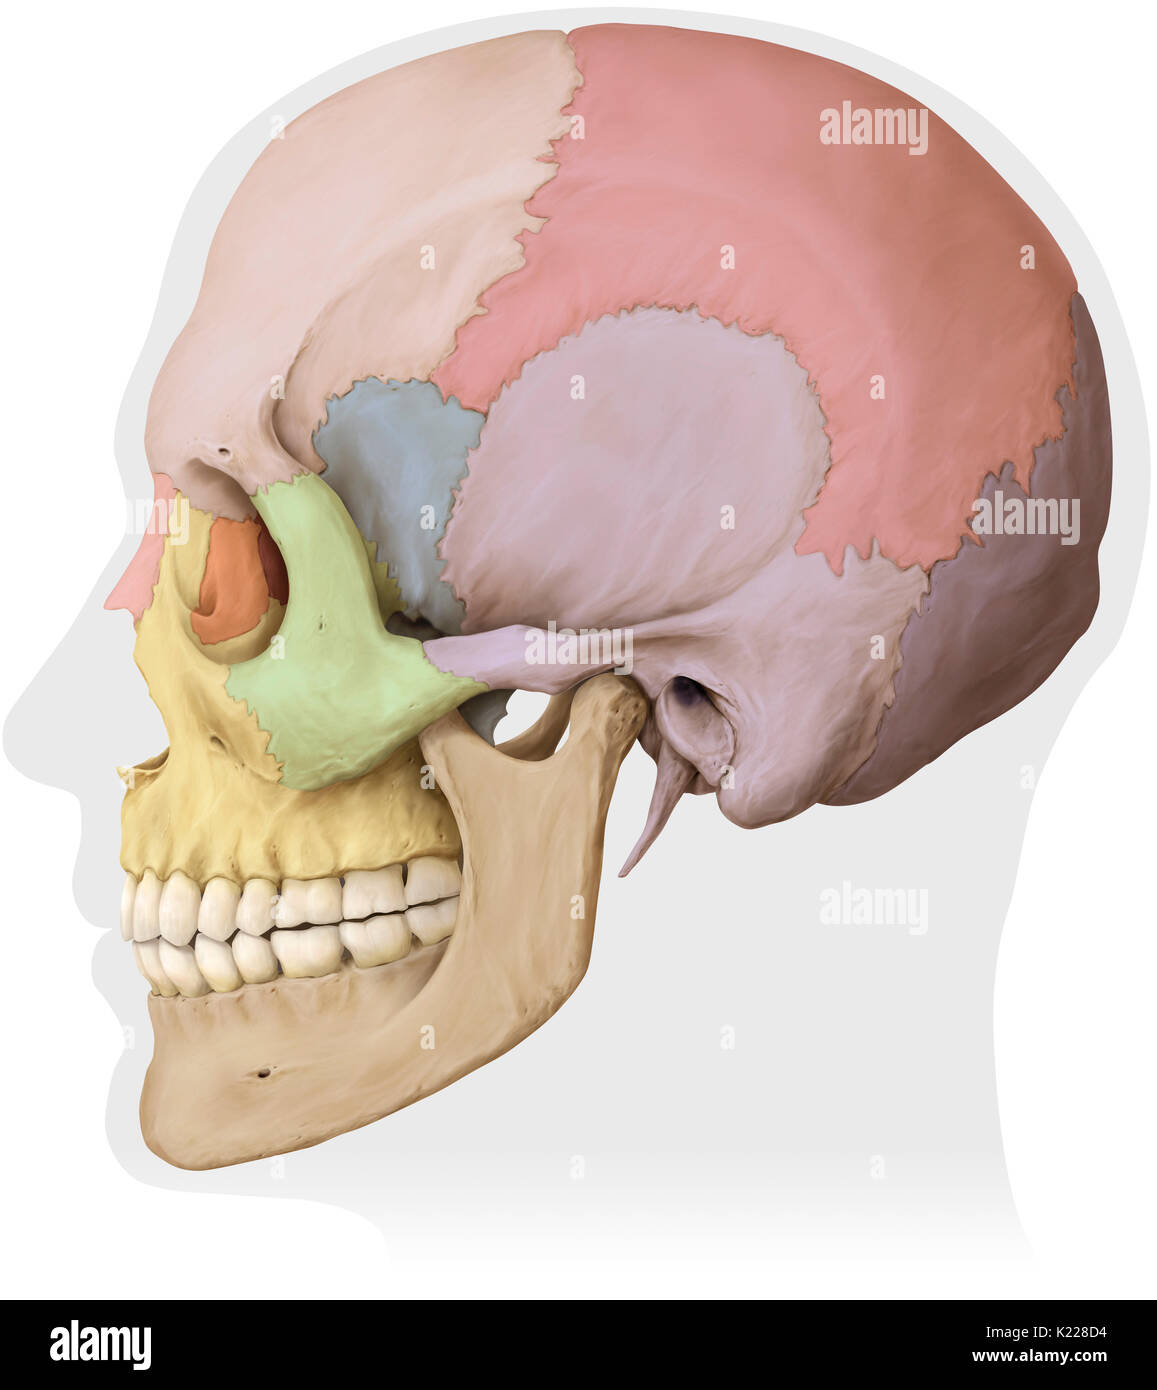 Bony structure formed of eight bones (four even bones and four odd bones) covering and protecting the brain. Stock Photo